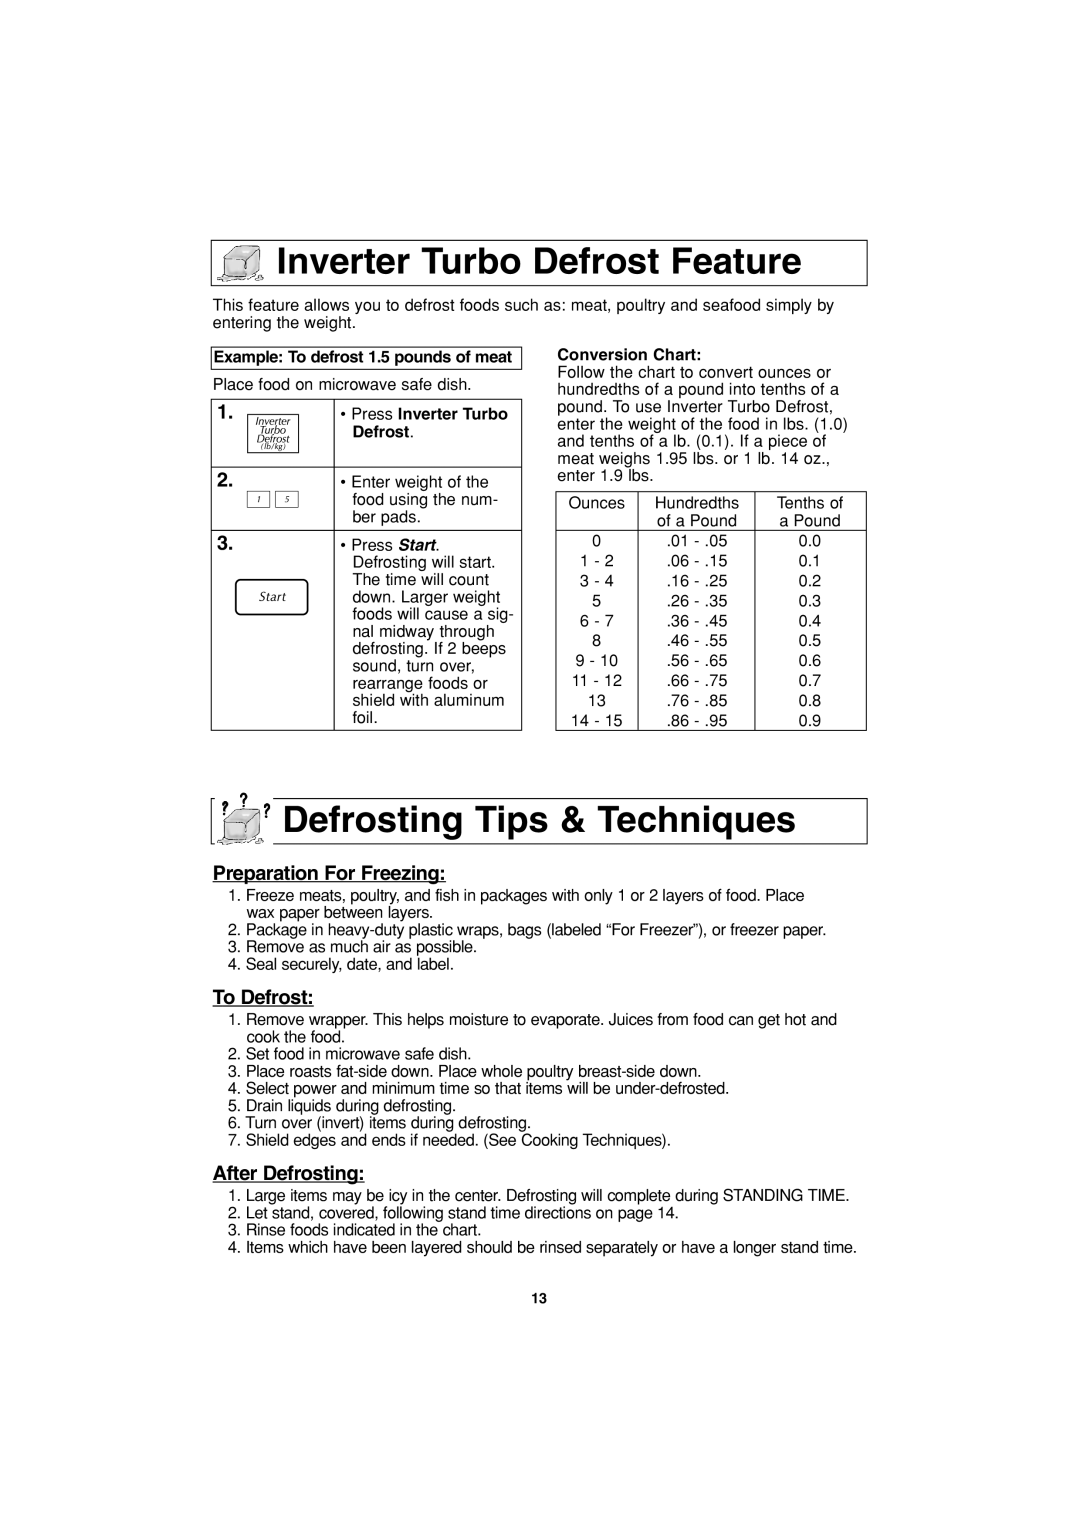 Panasonic NN-S443 Inverter Turbo Defrost Feature, Defrosting Tips & Techniques, Preparation For Freezing, To Defrost 